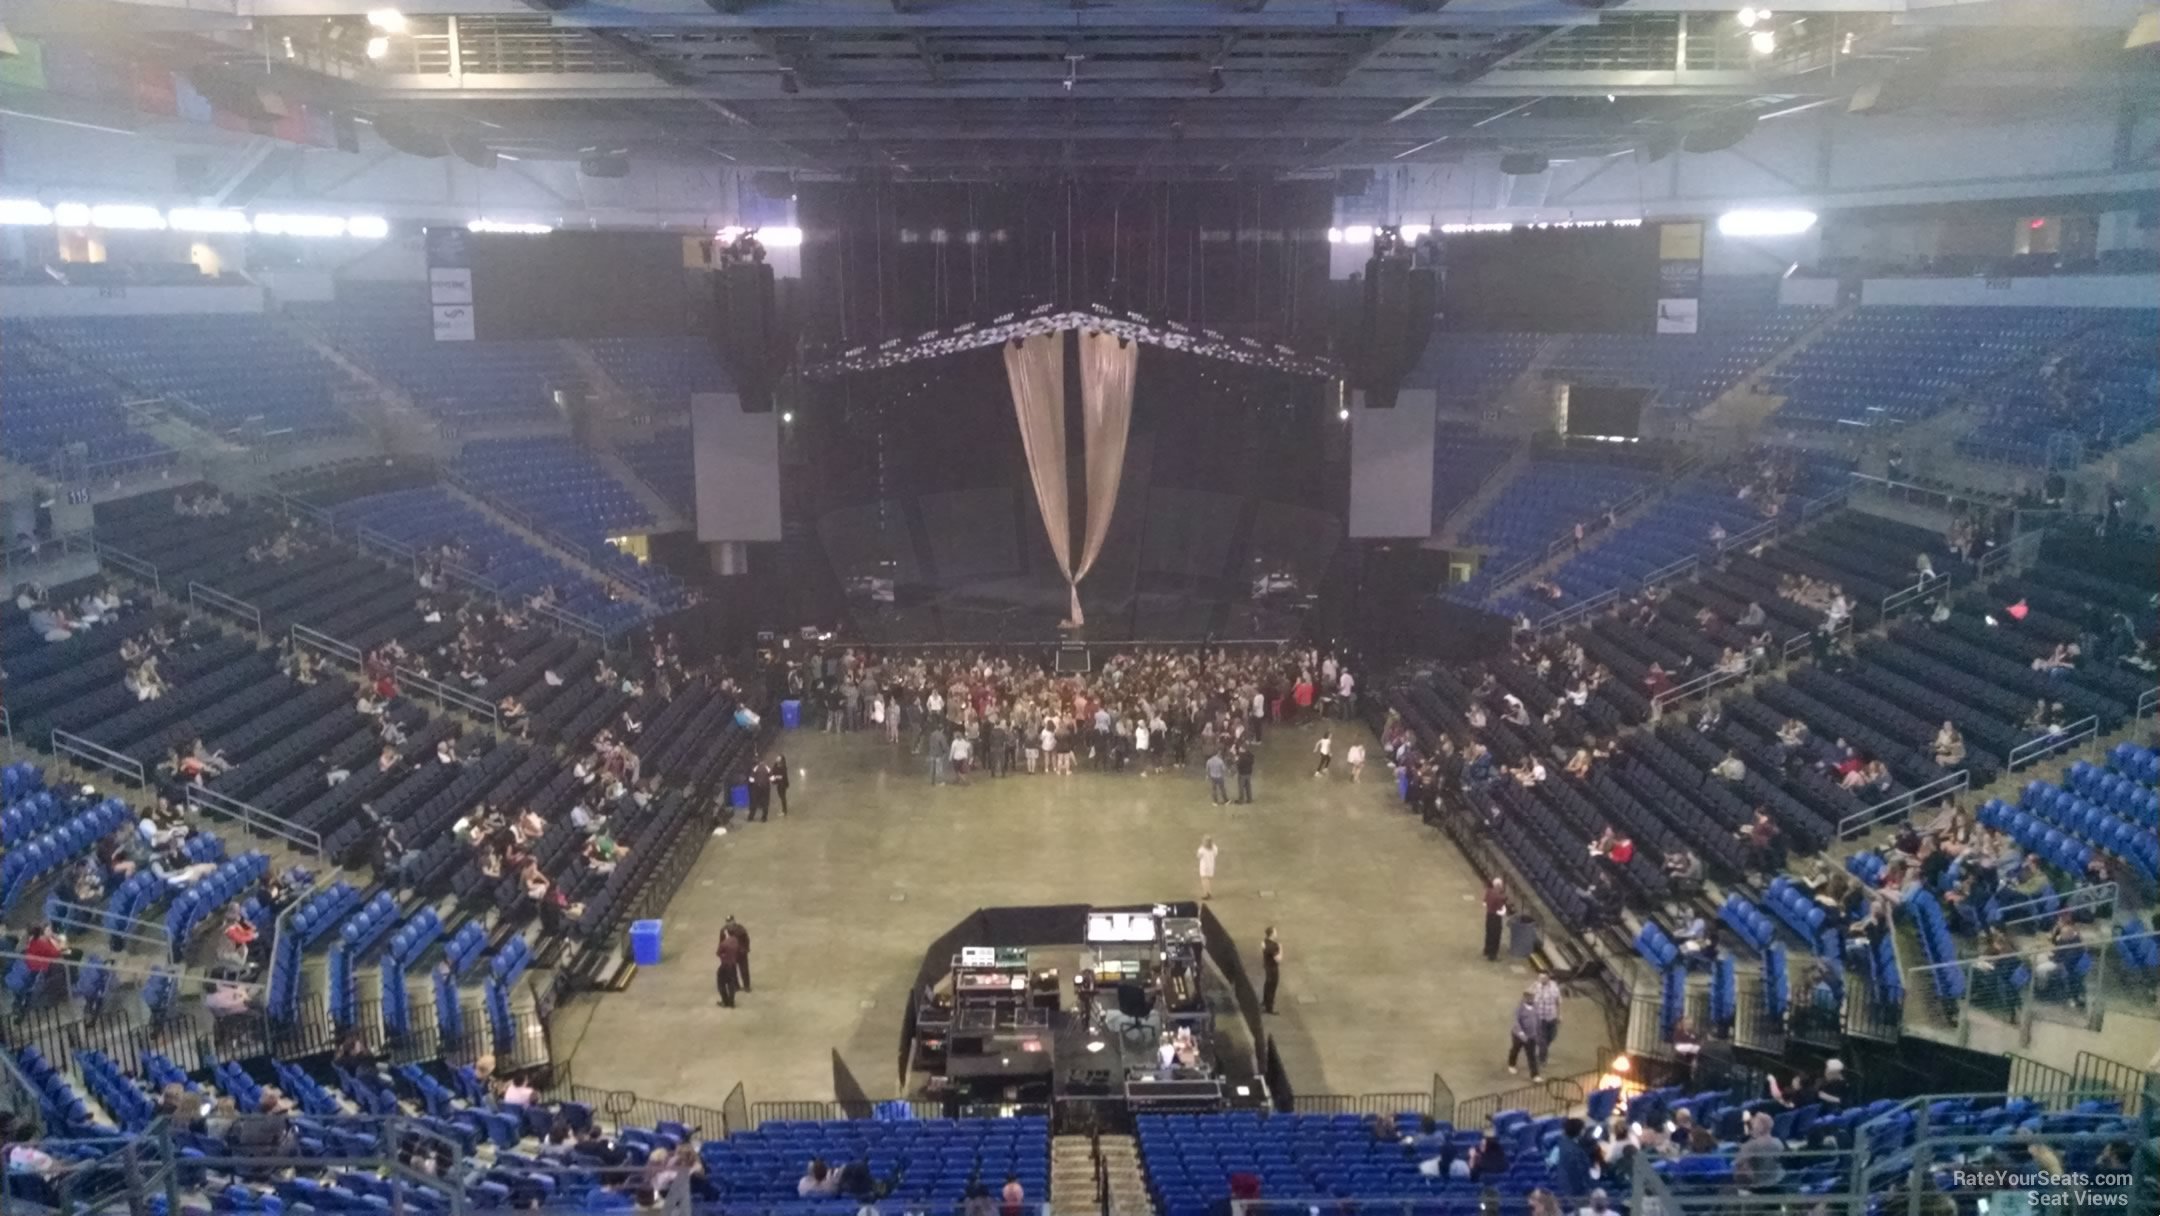 section 209, row j seat view  for concert - chaifetz arena